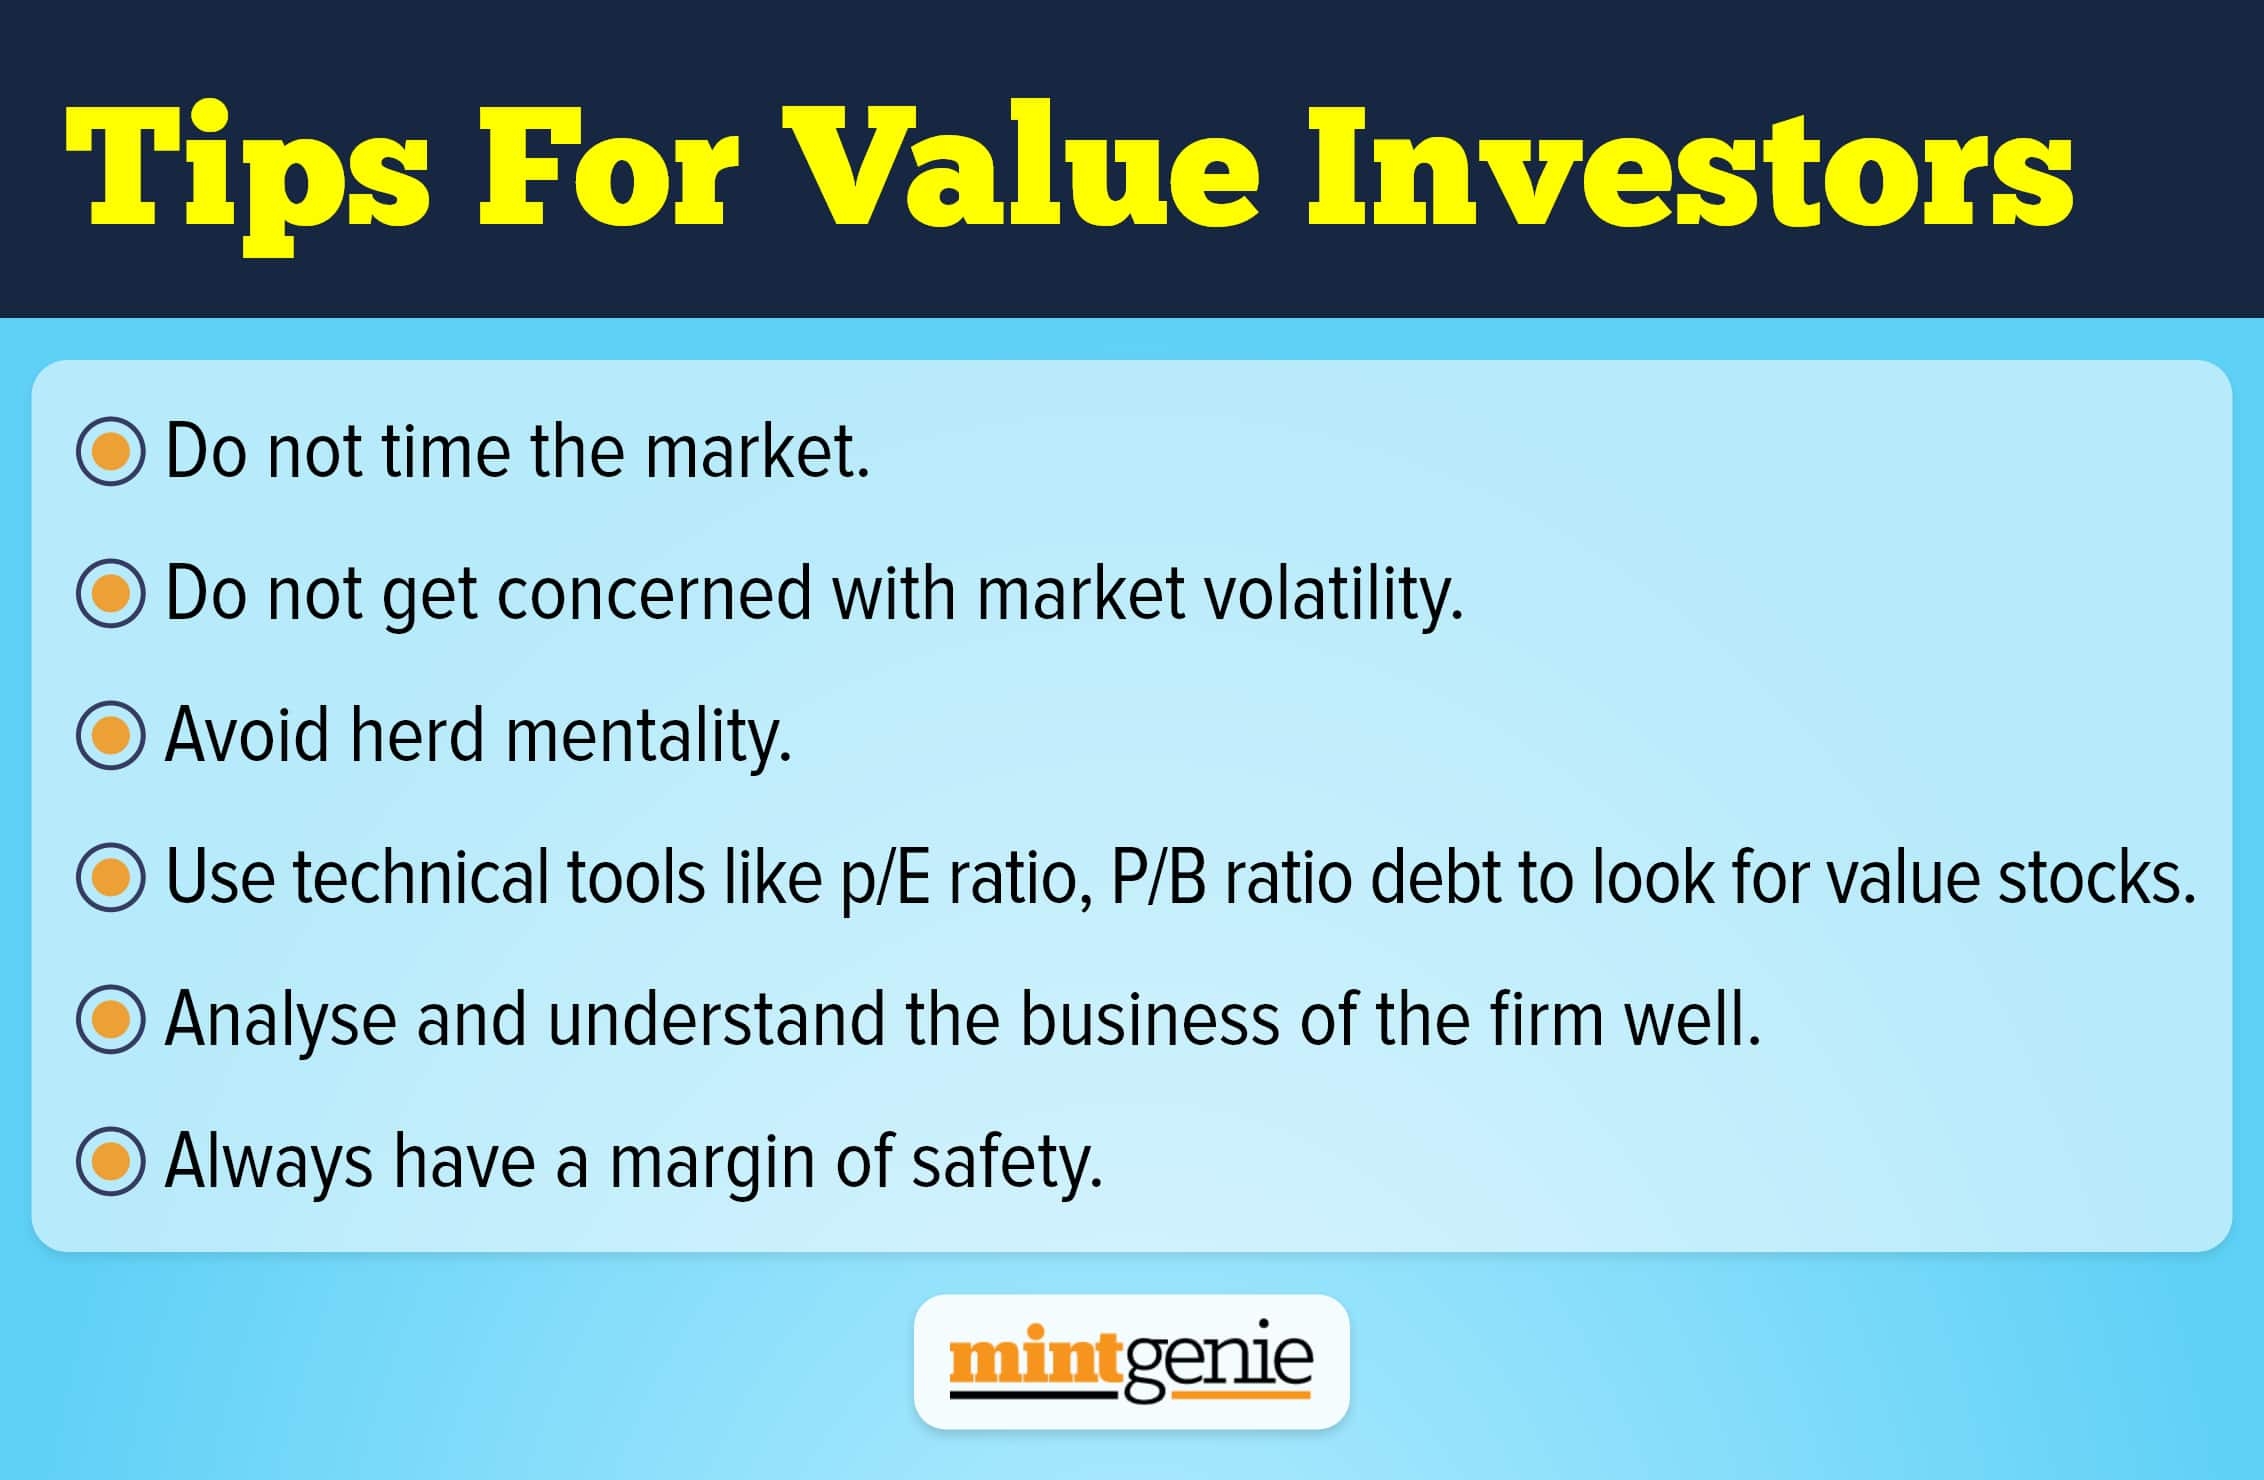 Tips for value investing